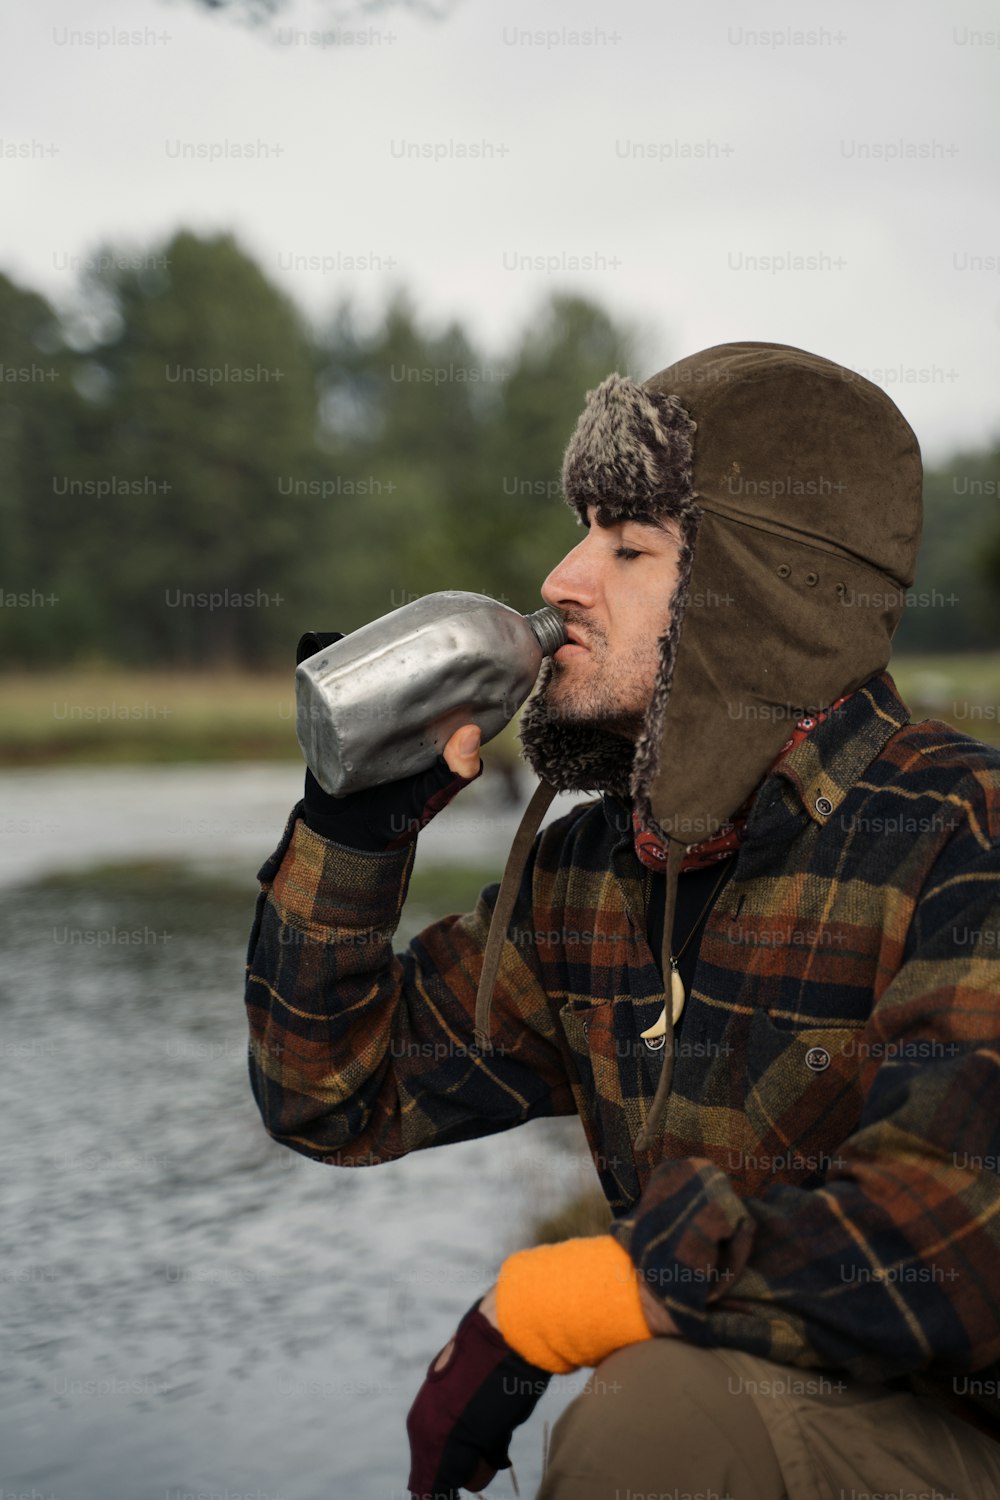 a man wearing a hat drinking from a water bottle